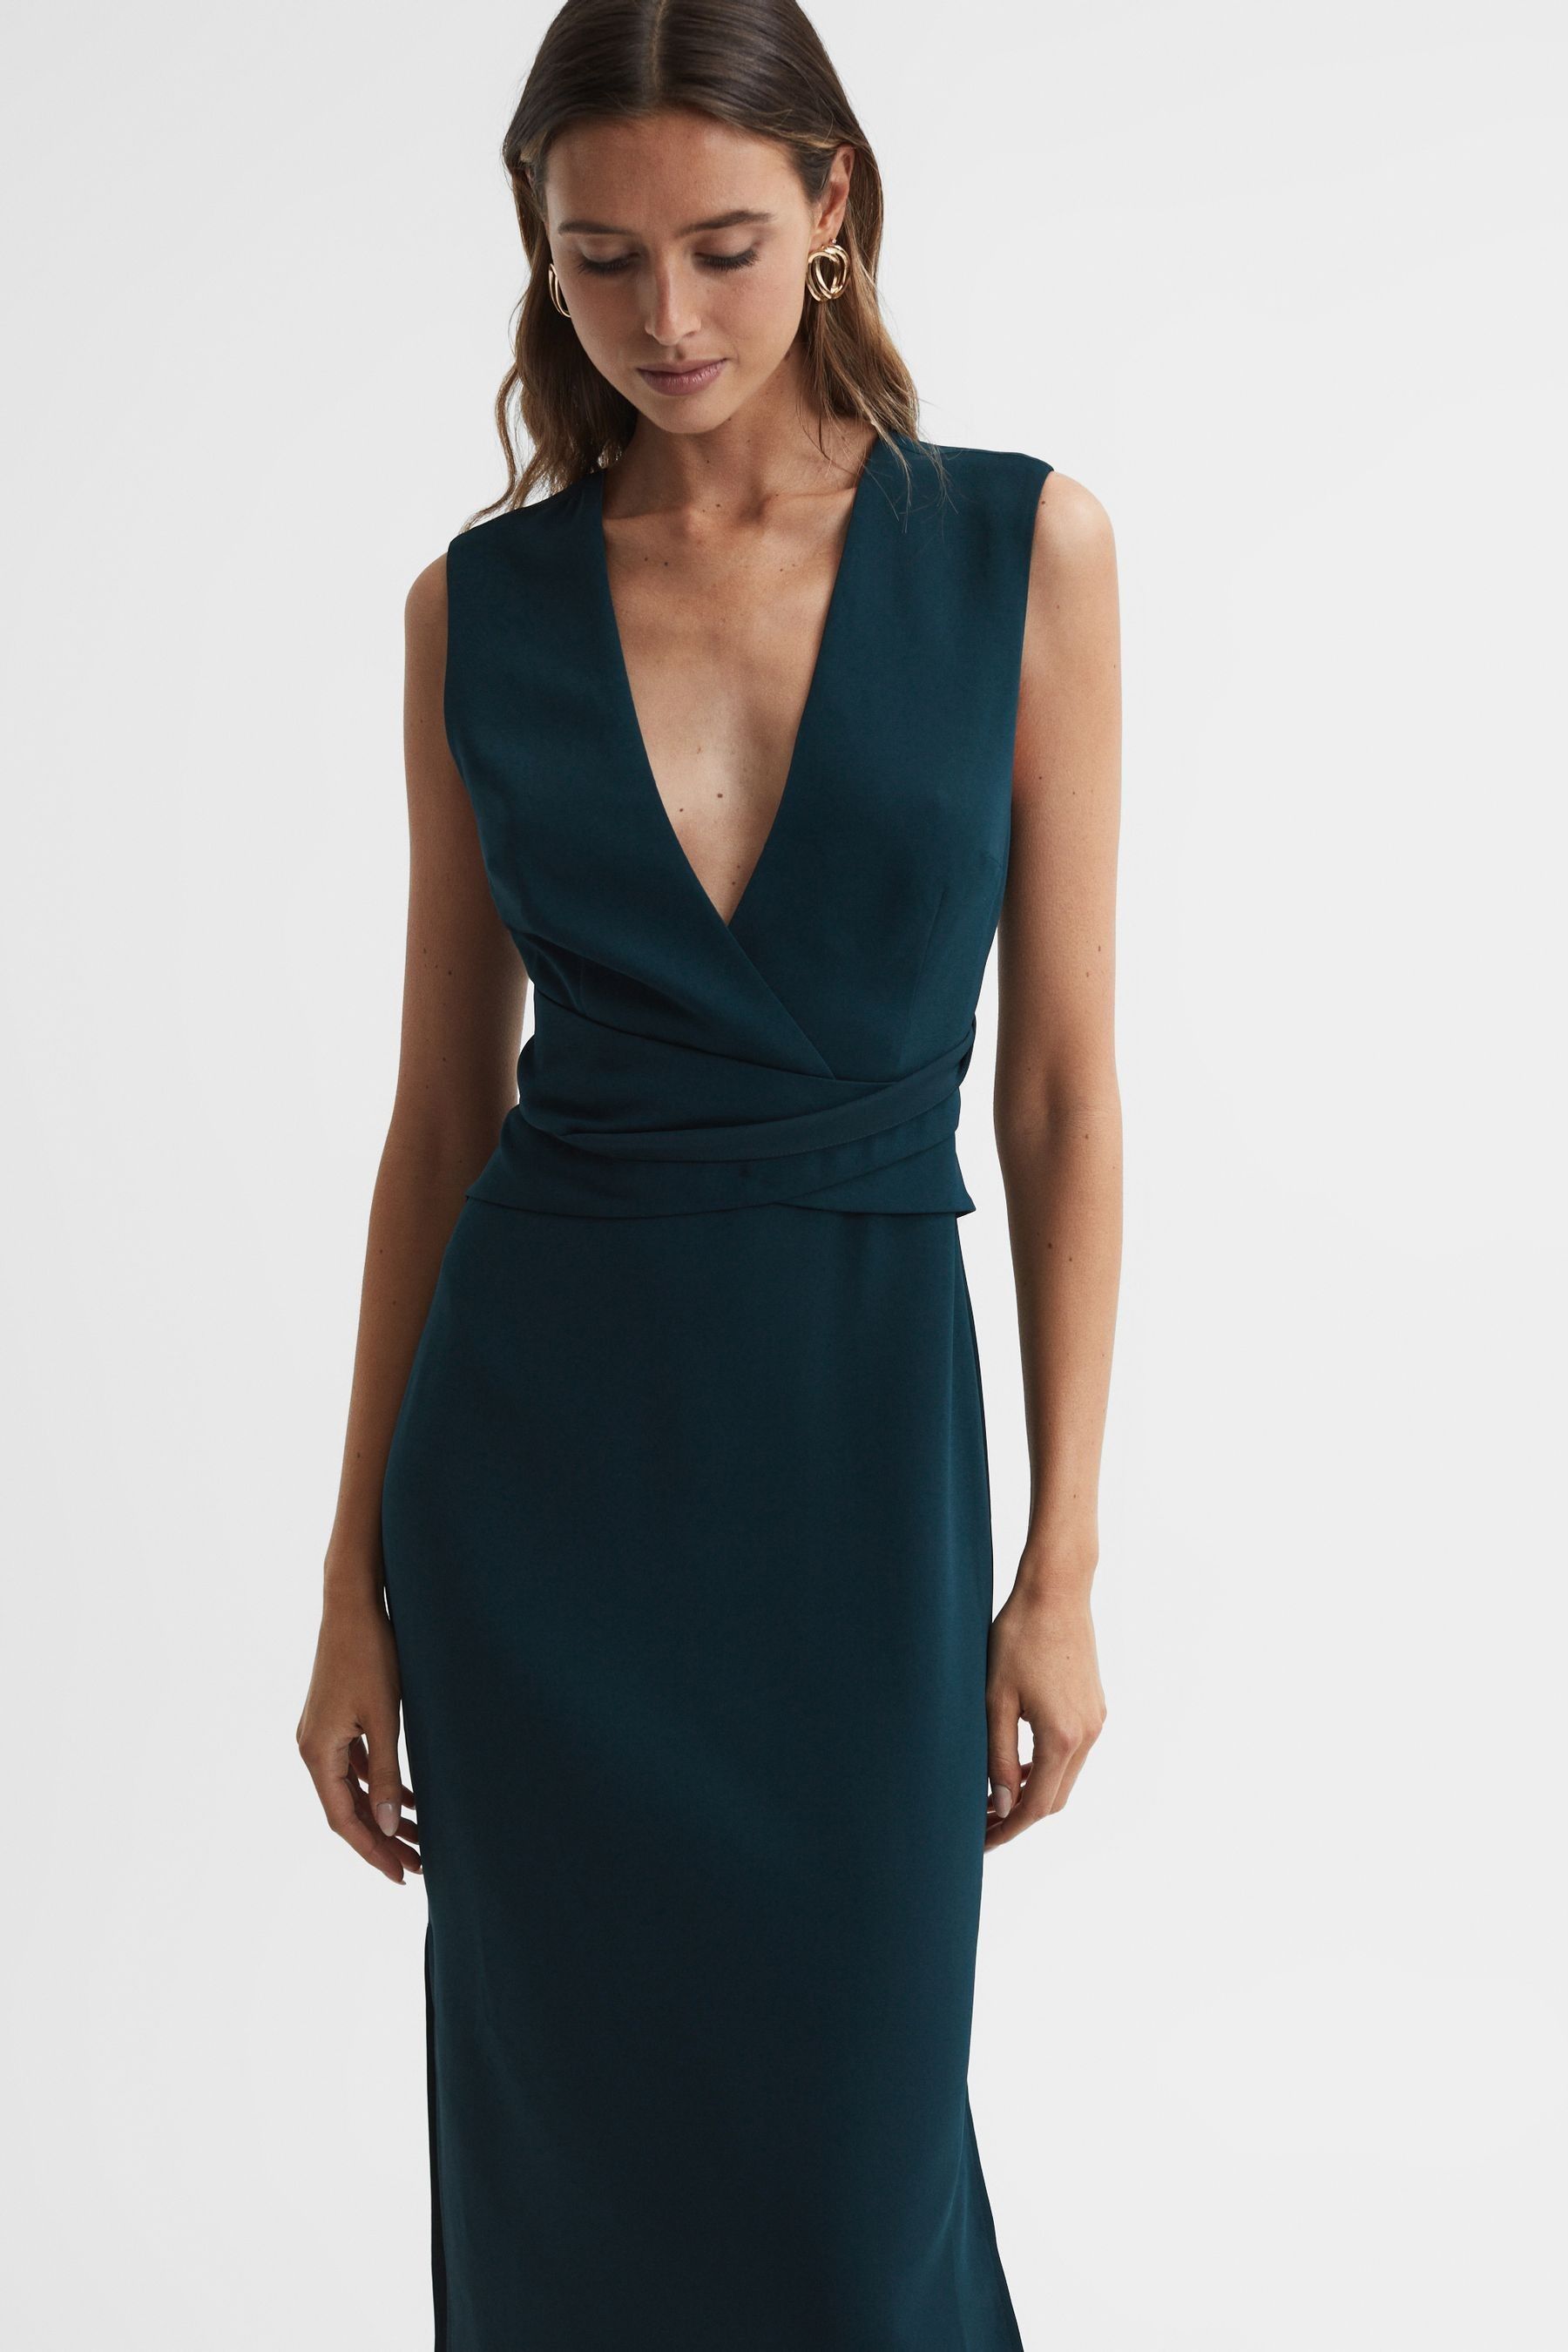 Buy Reiss Jayla Fitted Wrap Design Midi Dress from the Next UK online shop